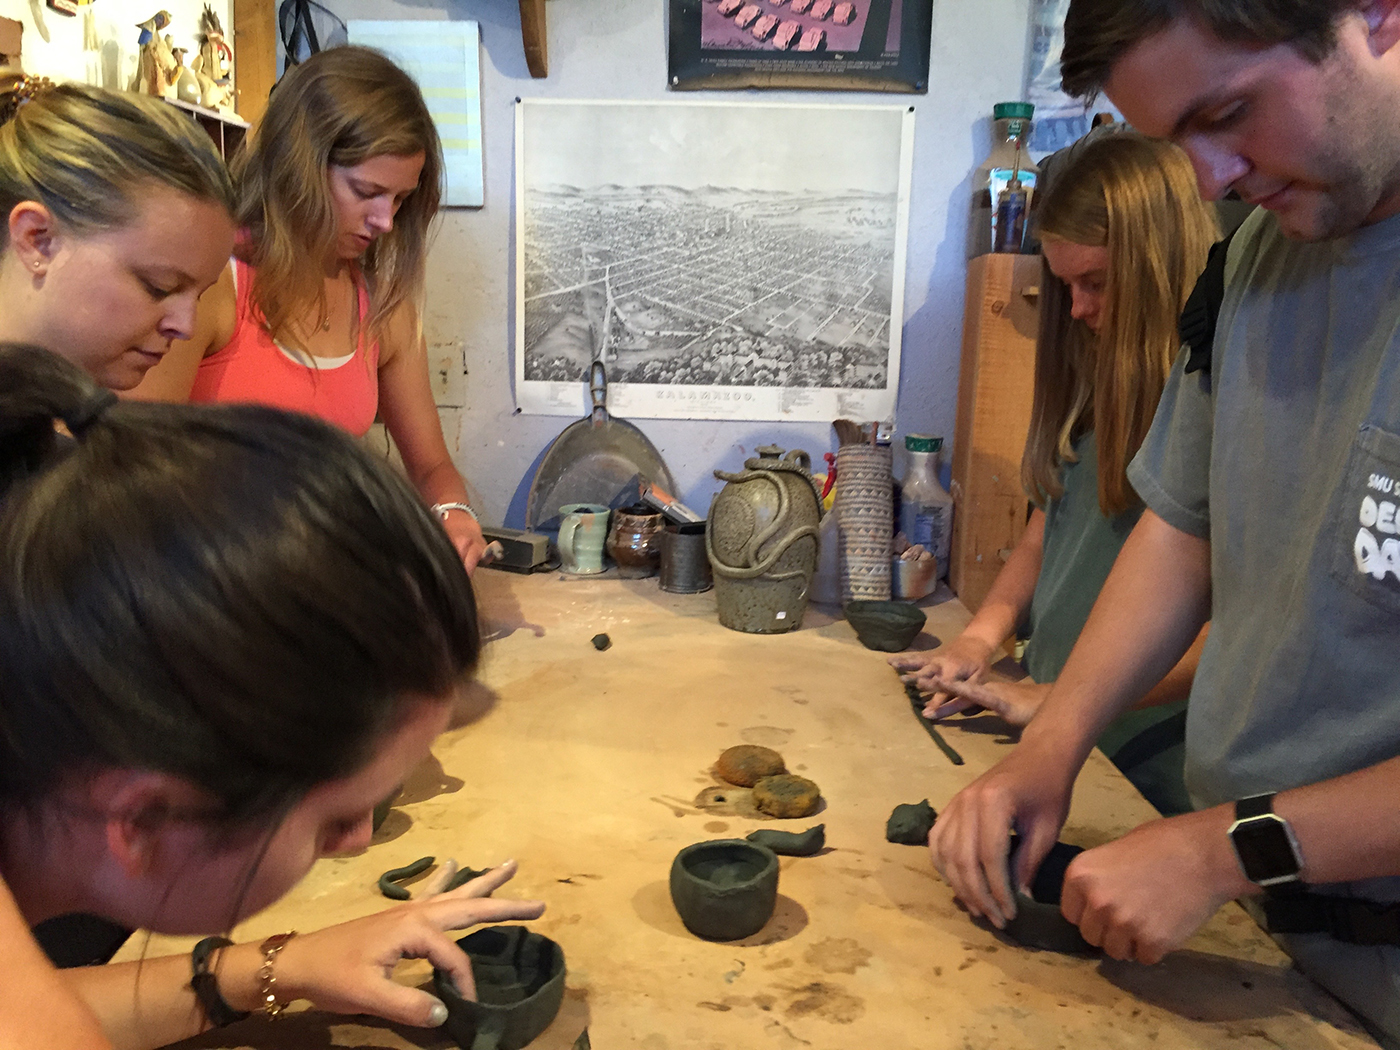 SMU-in-Taos students learn pottery in a hands-on workshop